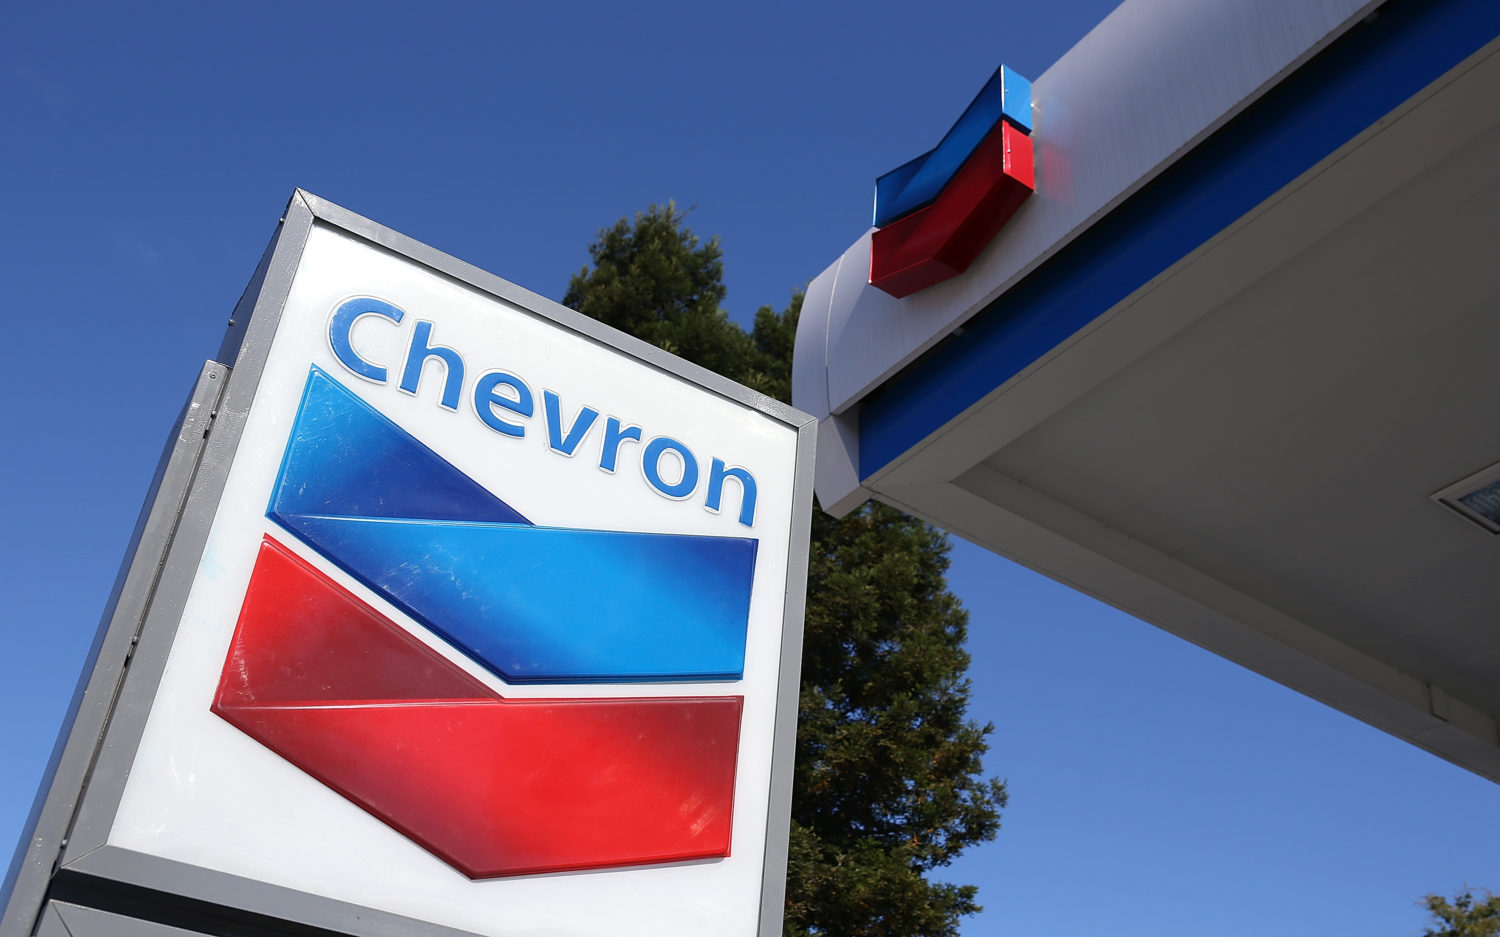 We didn't lay off 175 employees, Chevron explains